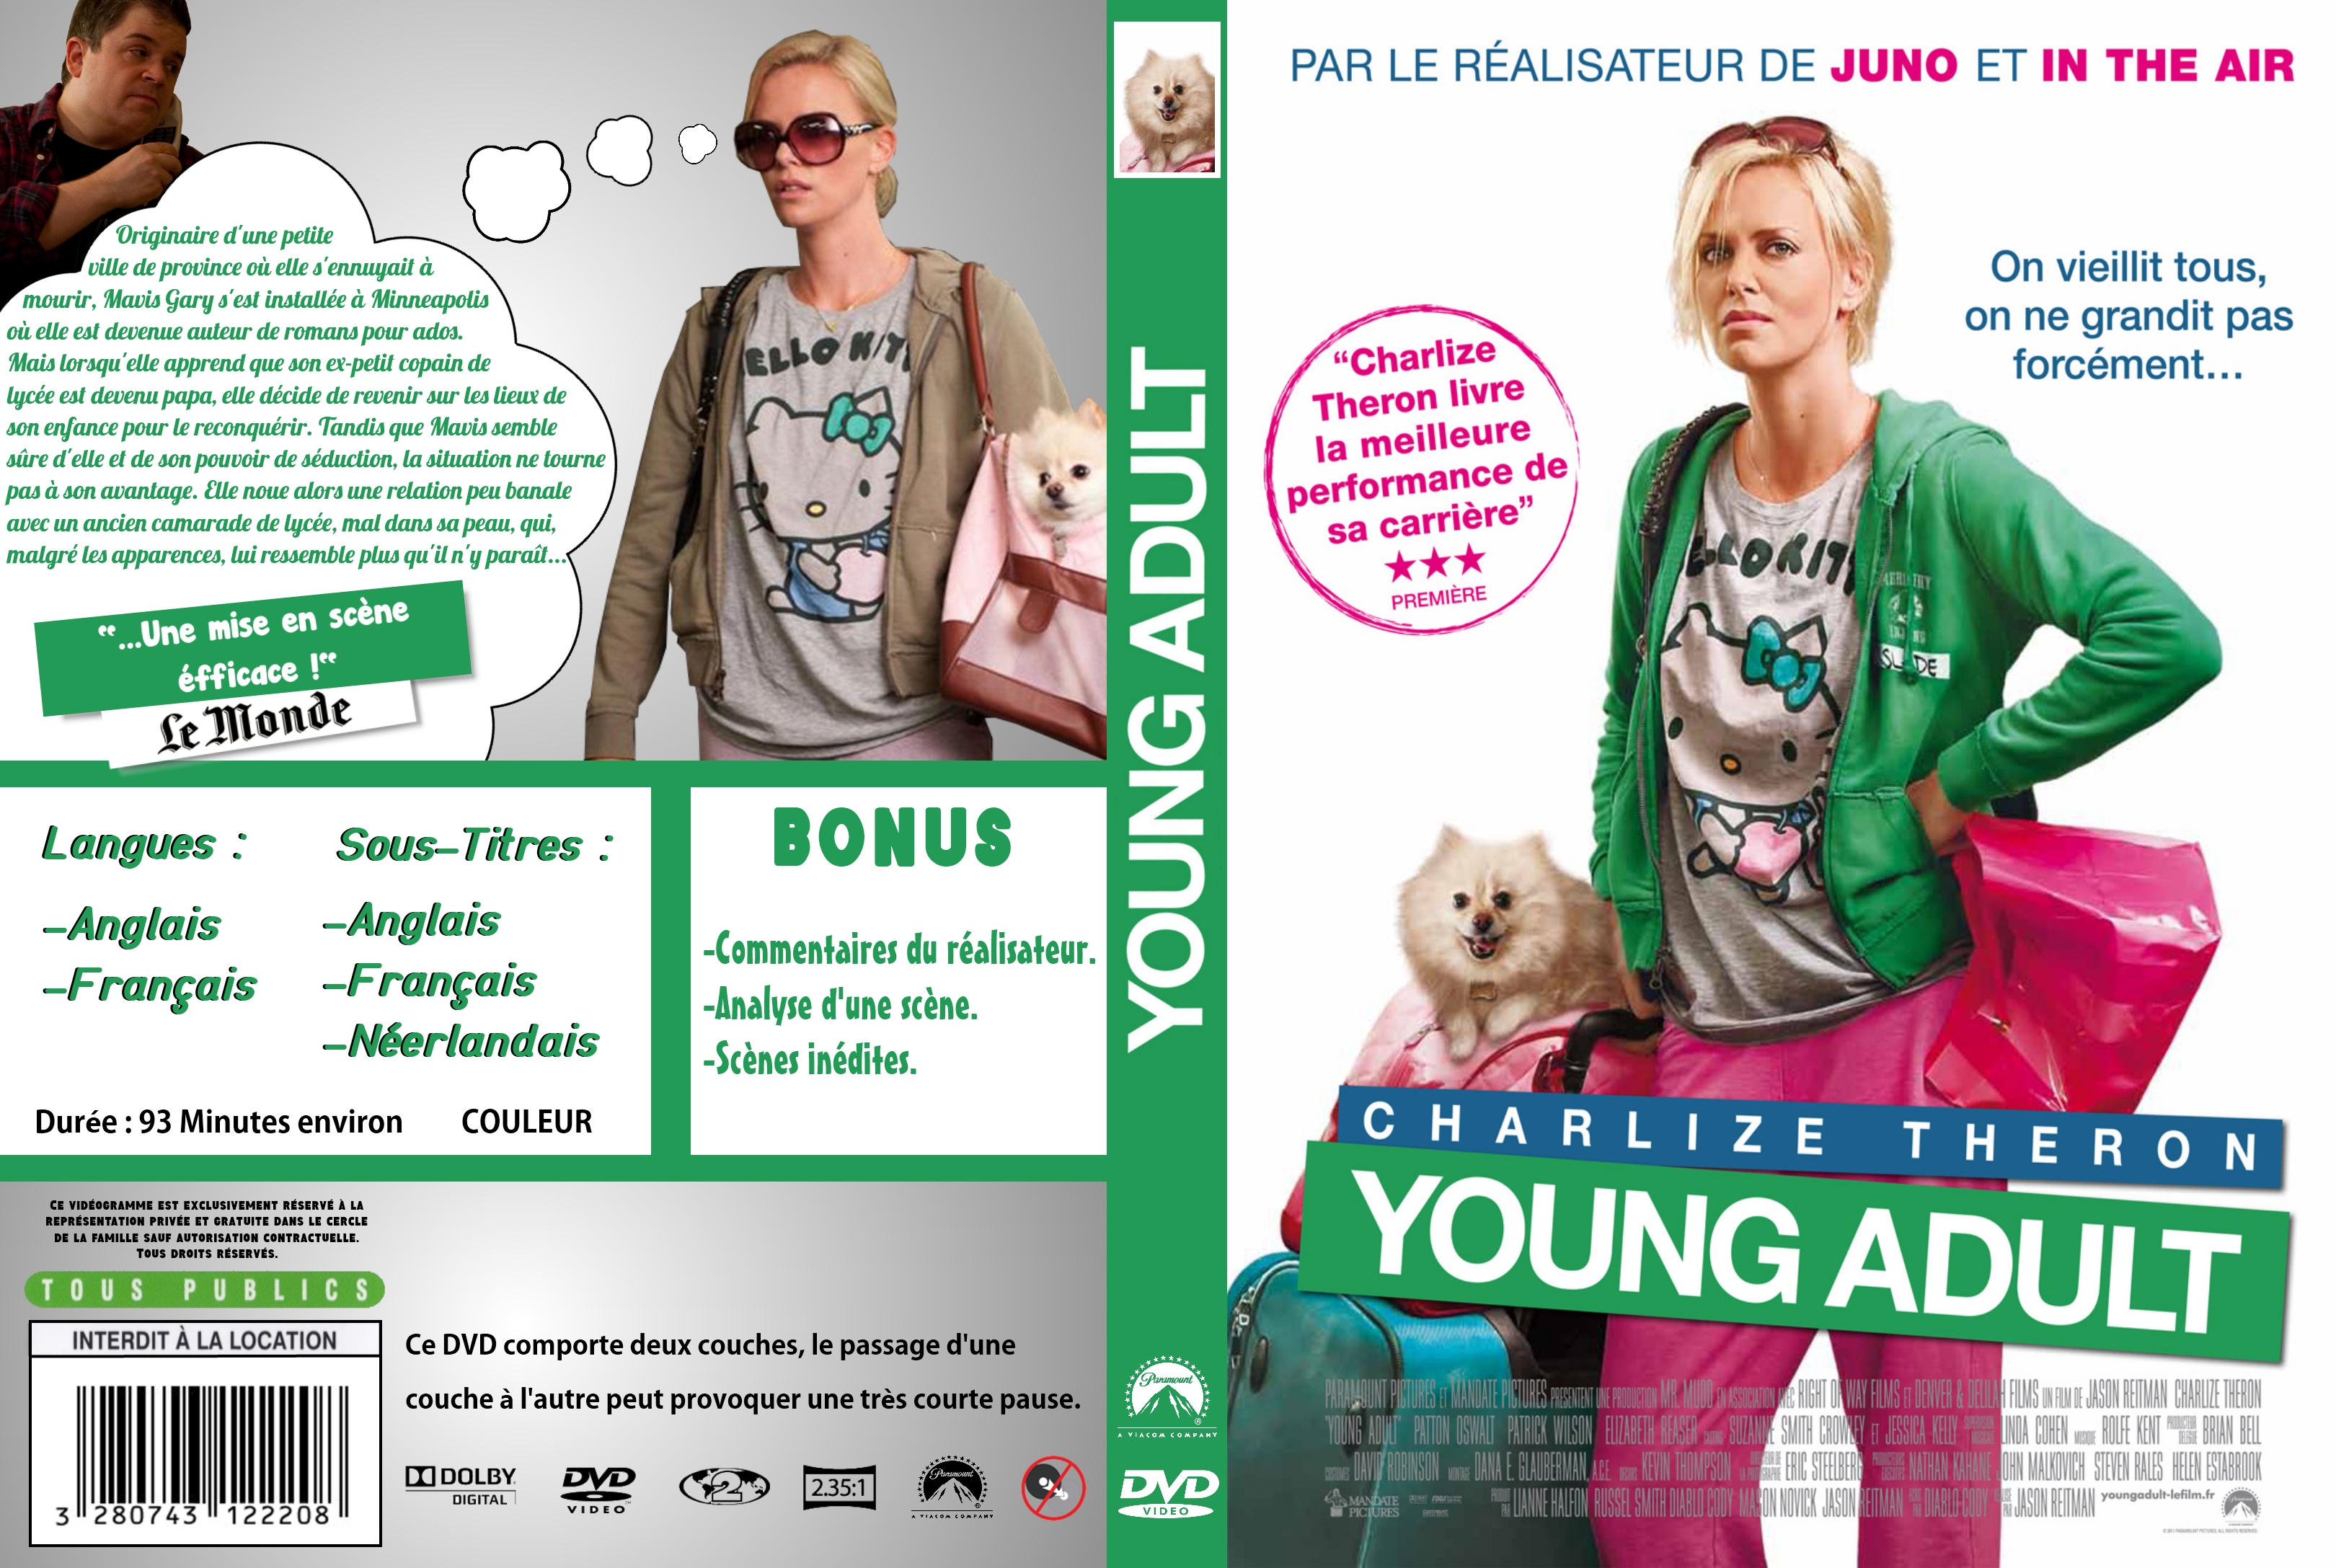 Jaquette DVD Young Adult custom v2